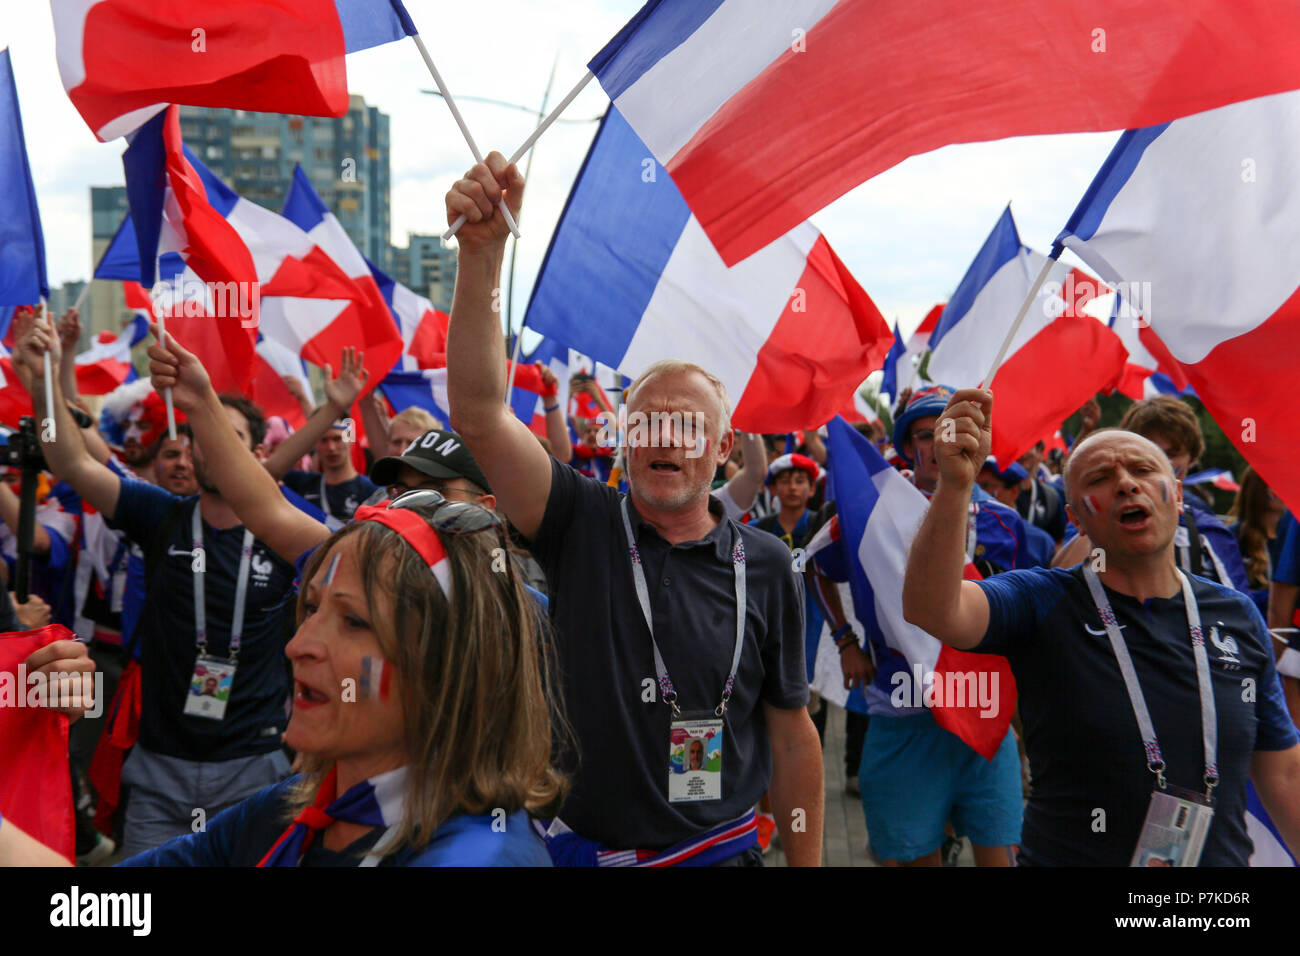 Nizhny Novgorod, Russia. 6th July, 2018. French football fans seen celebrating with their national flags.French football fans celebrate their national football team victory over uruguay during the quarterfinal match of the Russia 2018 world cup finals. Credit: Aleksey Fokin/SOPA Images/ZUMA Wire/Alamy Live News Stock Photo